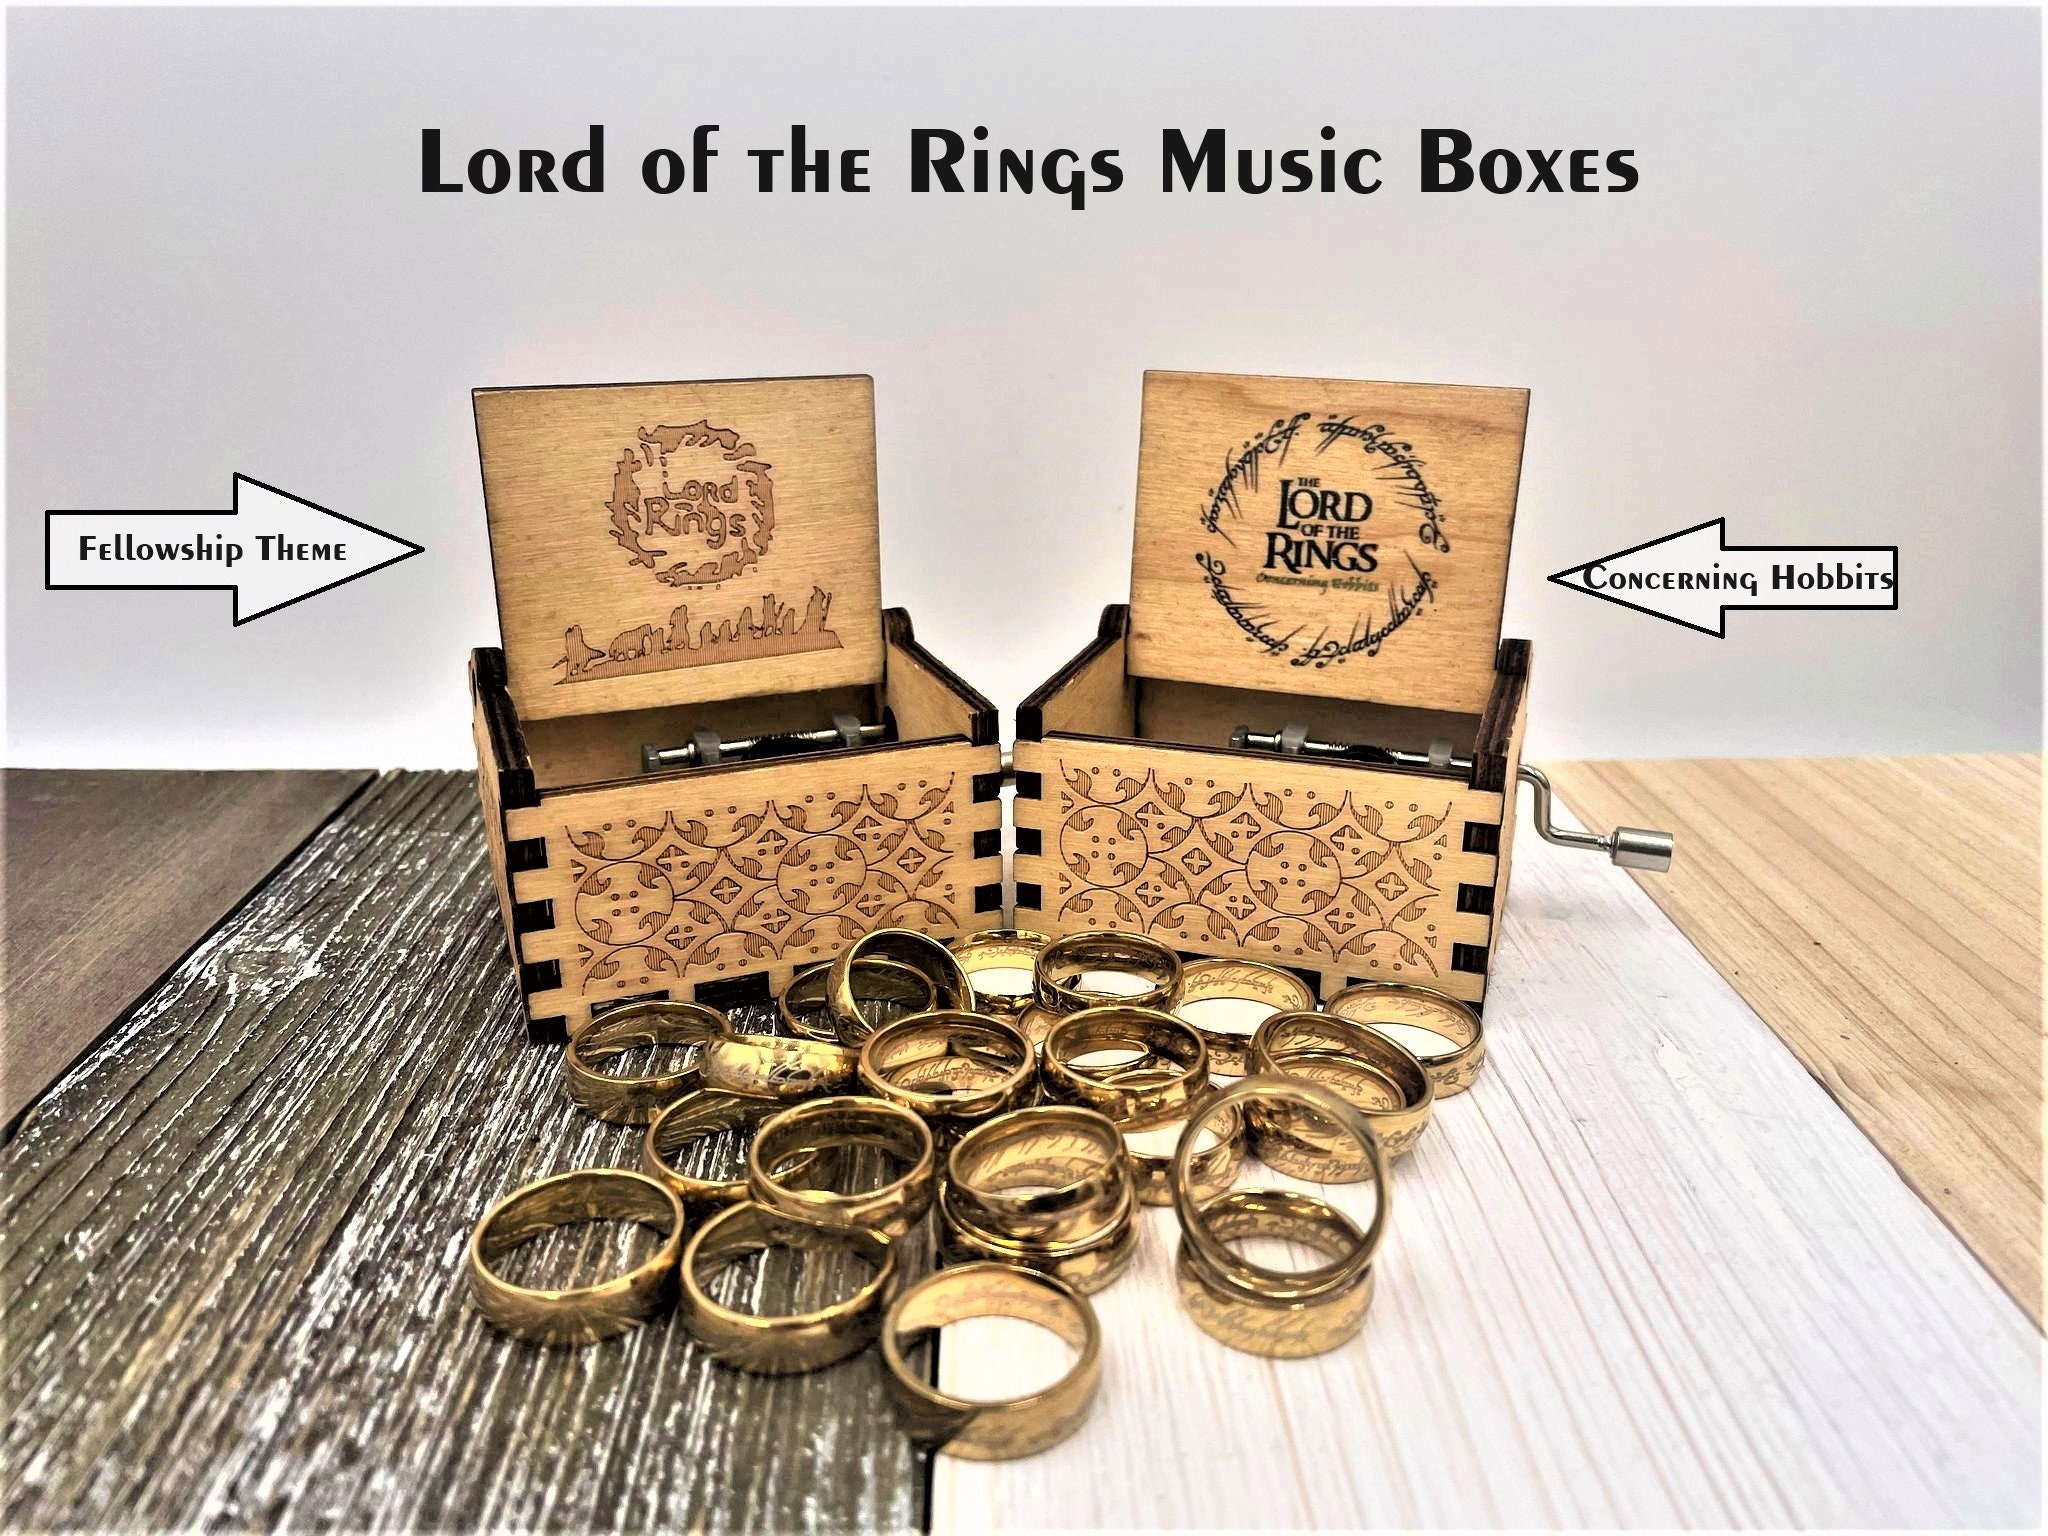 The Fellowship Of The Ring Gifts & Merchandise for Sale